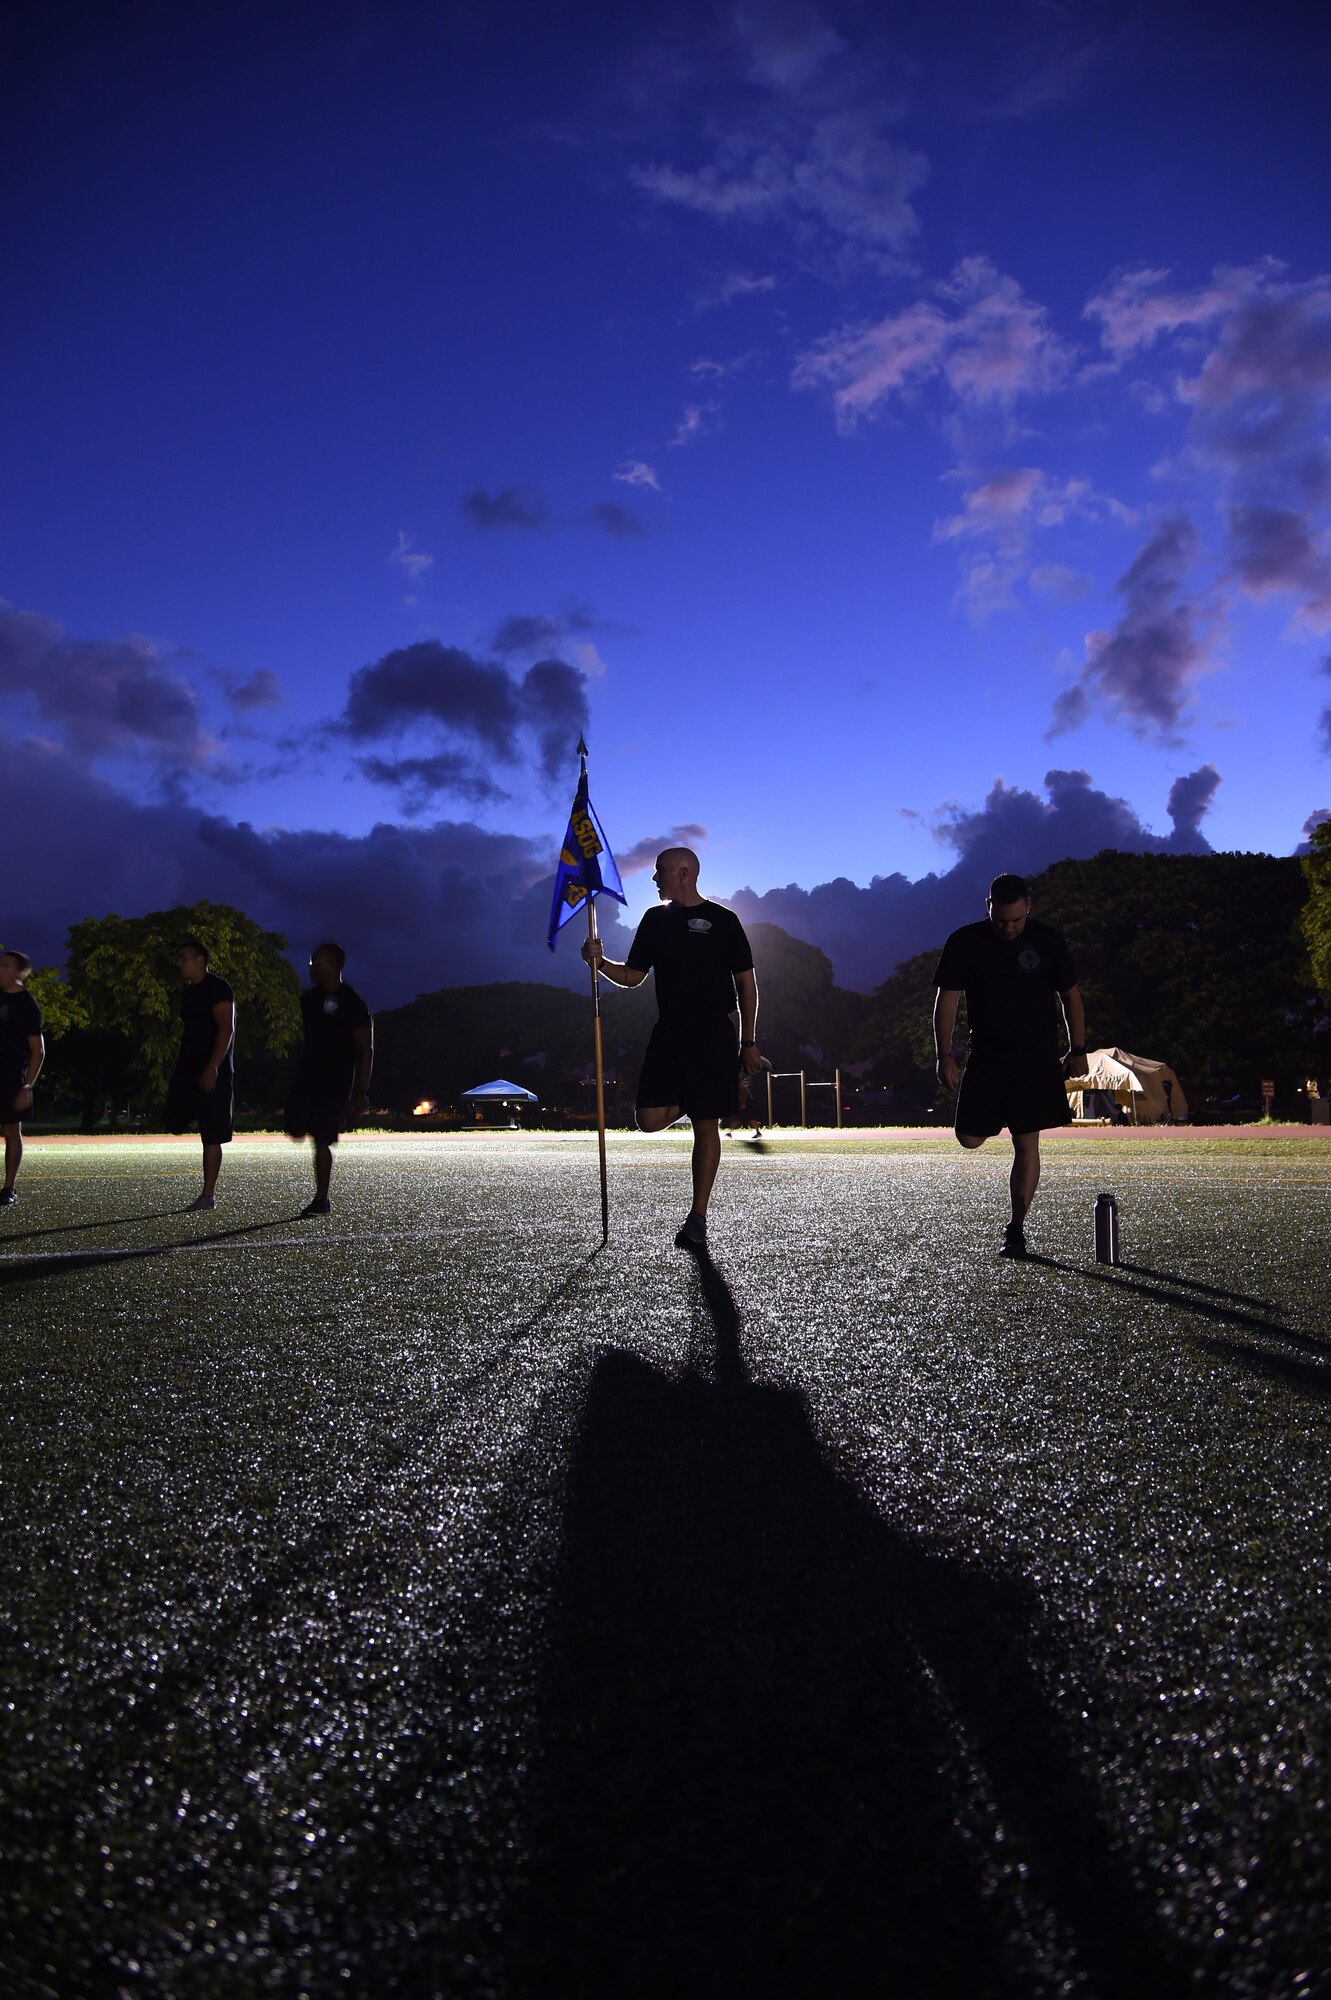 U.S. Air Force Master Sgt. Kurt Ward,  first sergeant from the 25th Air Support Operations Squadron, stretches before a formation run at the end of the 24-hour Prisoner of War and Missing In Action remembrance run on Joint Base Pearl Harbor-Hickam, Hawaii, Sept. 18, 2015. The 24 hour POW/MIA remembrance run was organized by the 25th Air Support Operations Squadron as a part of POW/MIA week and National POW/MIA Day. Every year the nation pauses on the third Friday of September to remember the sacrifices and service of prisoners of war. There are 83,344 Americans still unaccounted-for across the Defense Department. (U.S. Air Force photo by Tech. Sgt. Aaron Oelrich/Released)   